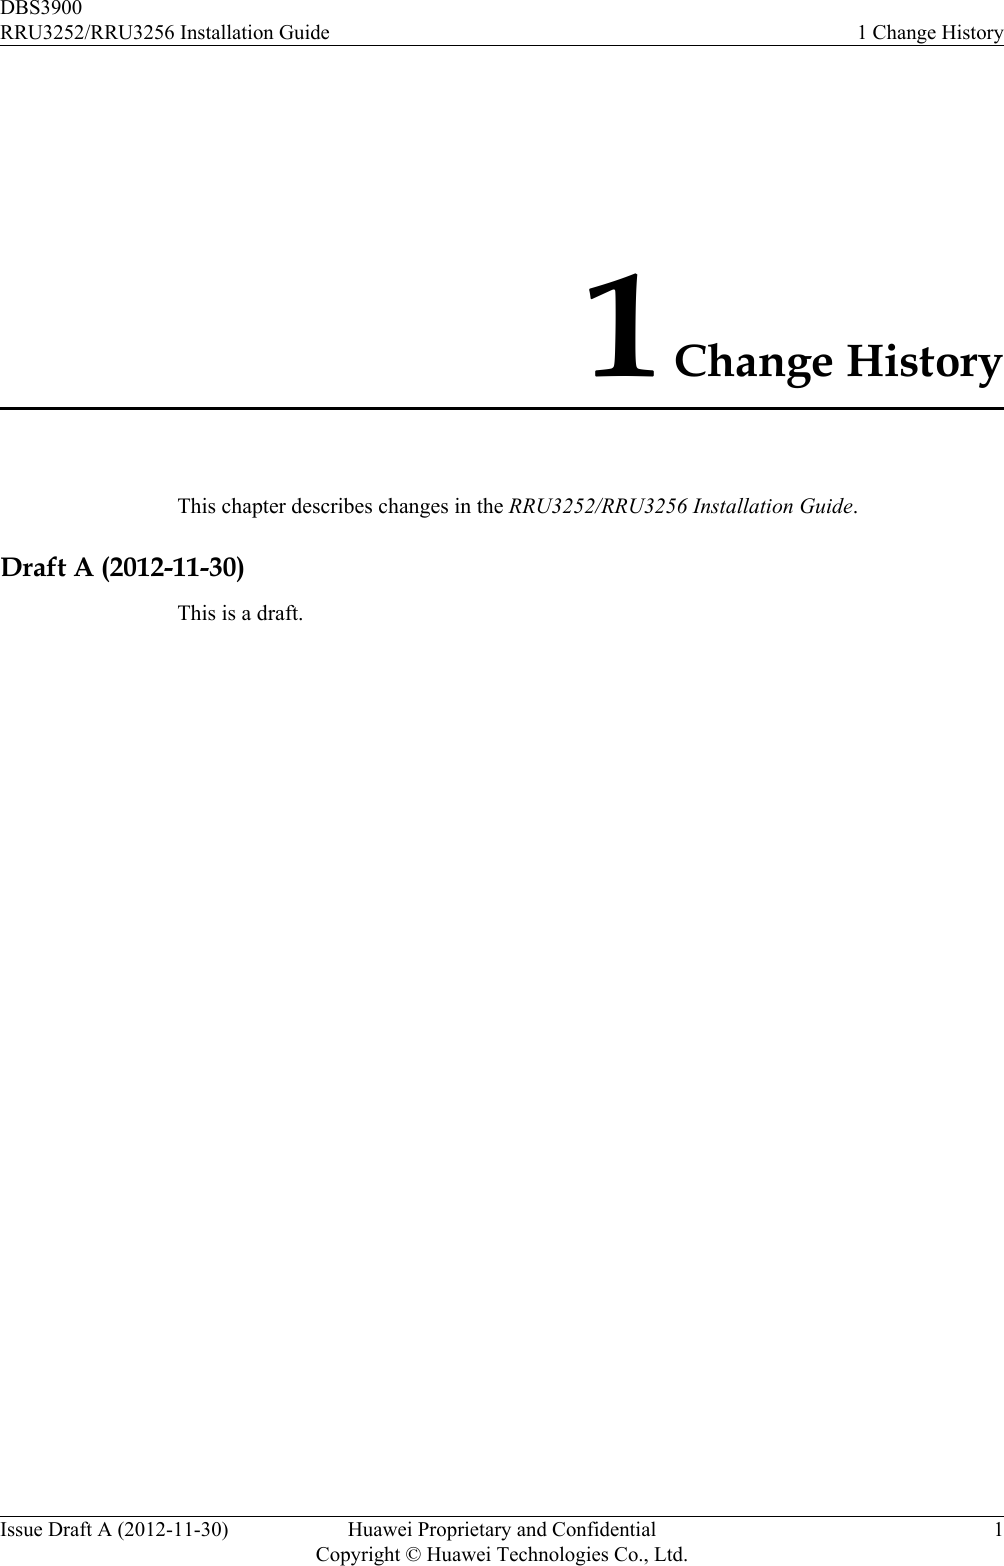 1 Change HistoryThis chapter describes changes in the RRU3252/RRU3256 Installation Guide.Draft A (2012-11-30)This is a draft.DBS3900RRU3252/RRU3256 Installation Guide 1 Change HistoryIssue Draft A (2012-11-30) Huawei Proprietary and ConfidentialCopyright © Huawei Technologies Co., Ltd.1